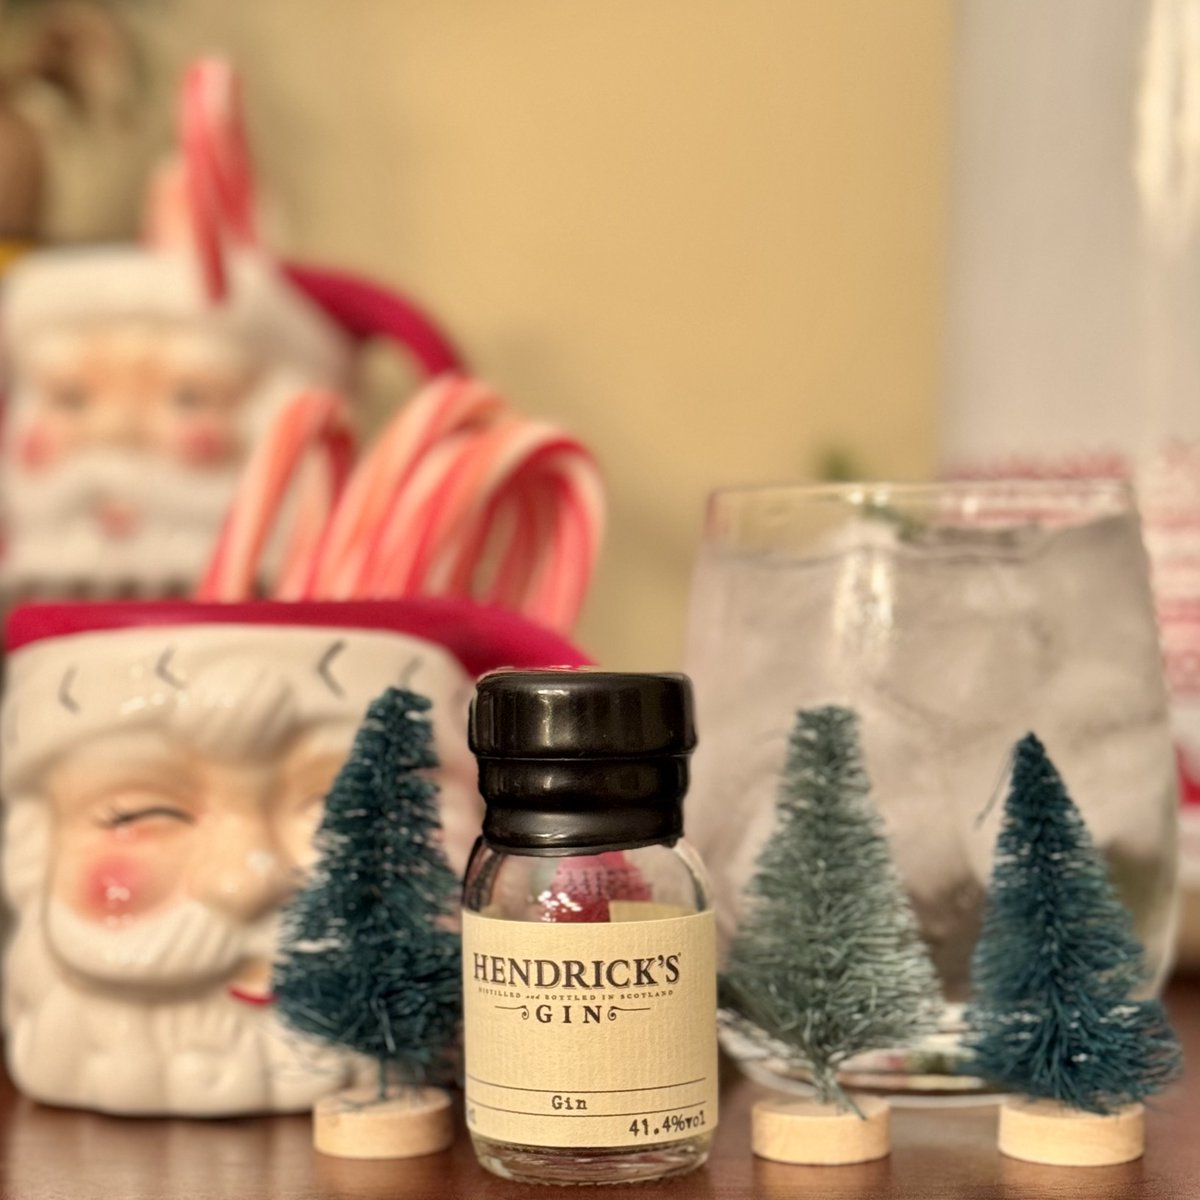 @UngavaGin @tarquinsgin @HendricksGin @Mayfield_Gin @tanquerayusa @MartinMillerUS Day 15 of #ginvent: Hendrinck's Gin by @HendricksGin 

A classic and for good reason. One of my favorite gins to recommend to anyone looking to try gin for the first time. Clean, smooth flavor that works in a G&T, a gimlet, and a number of other gin drinks. #cheers